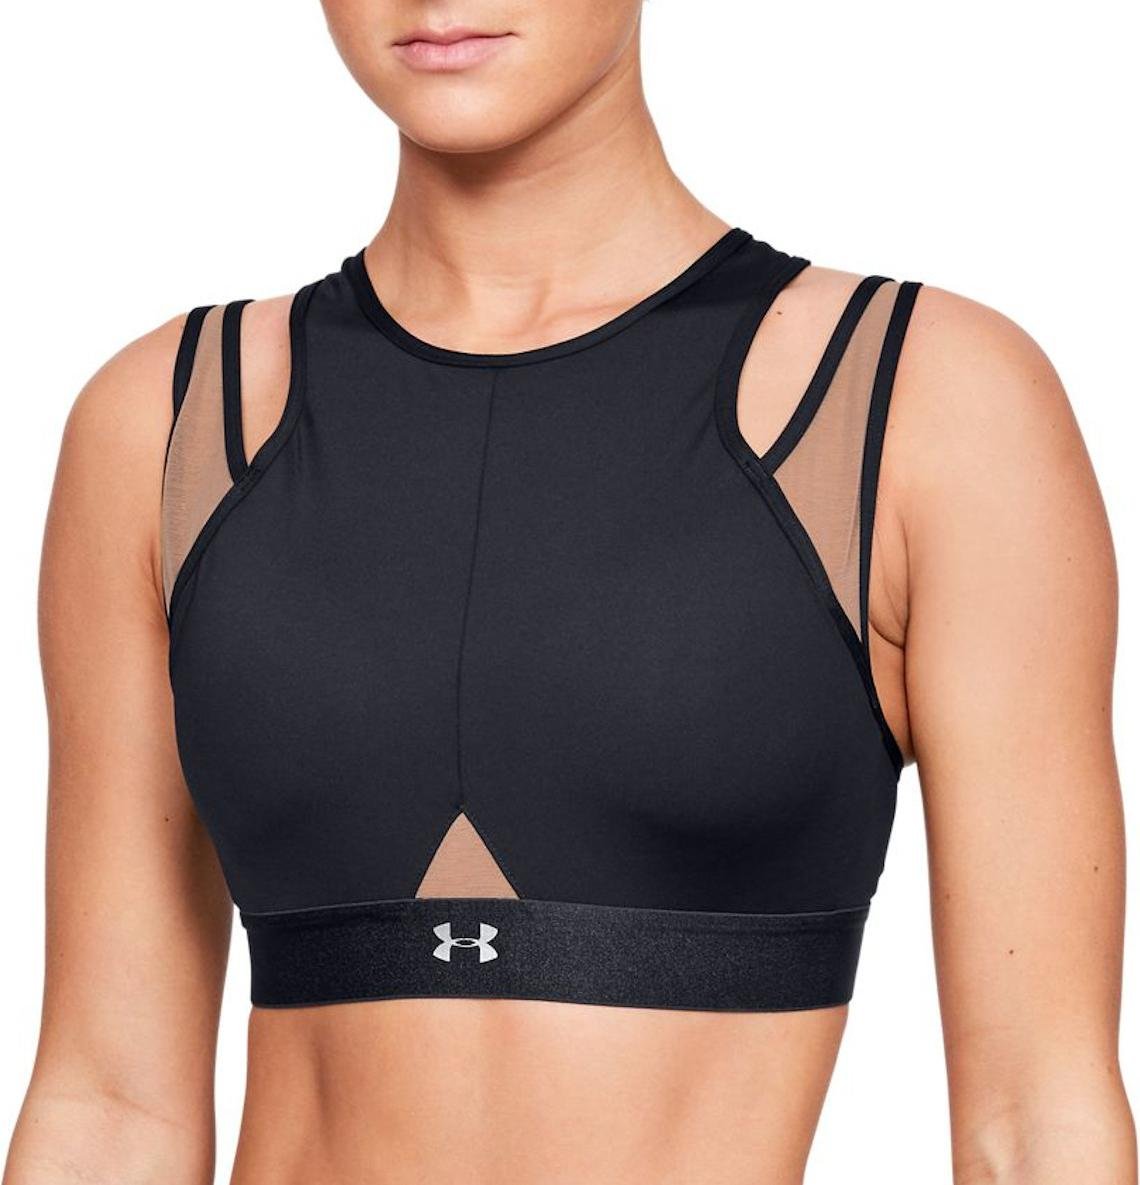 https://i1.t4s.cz/products/1344324-001/under-armour-perpetual-sports-bra-222975-1344324-002.jpeg